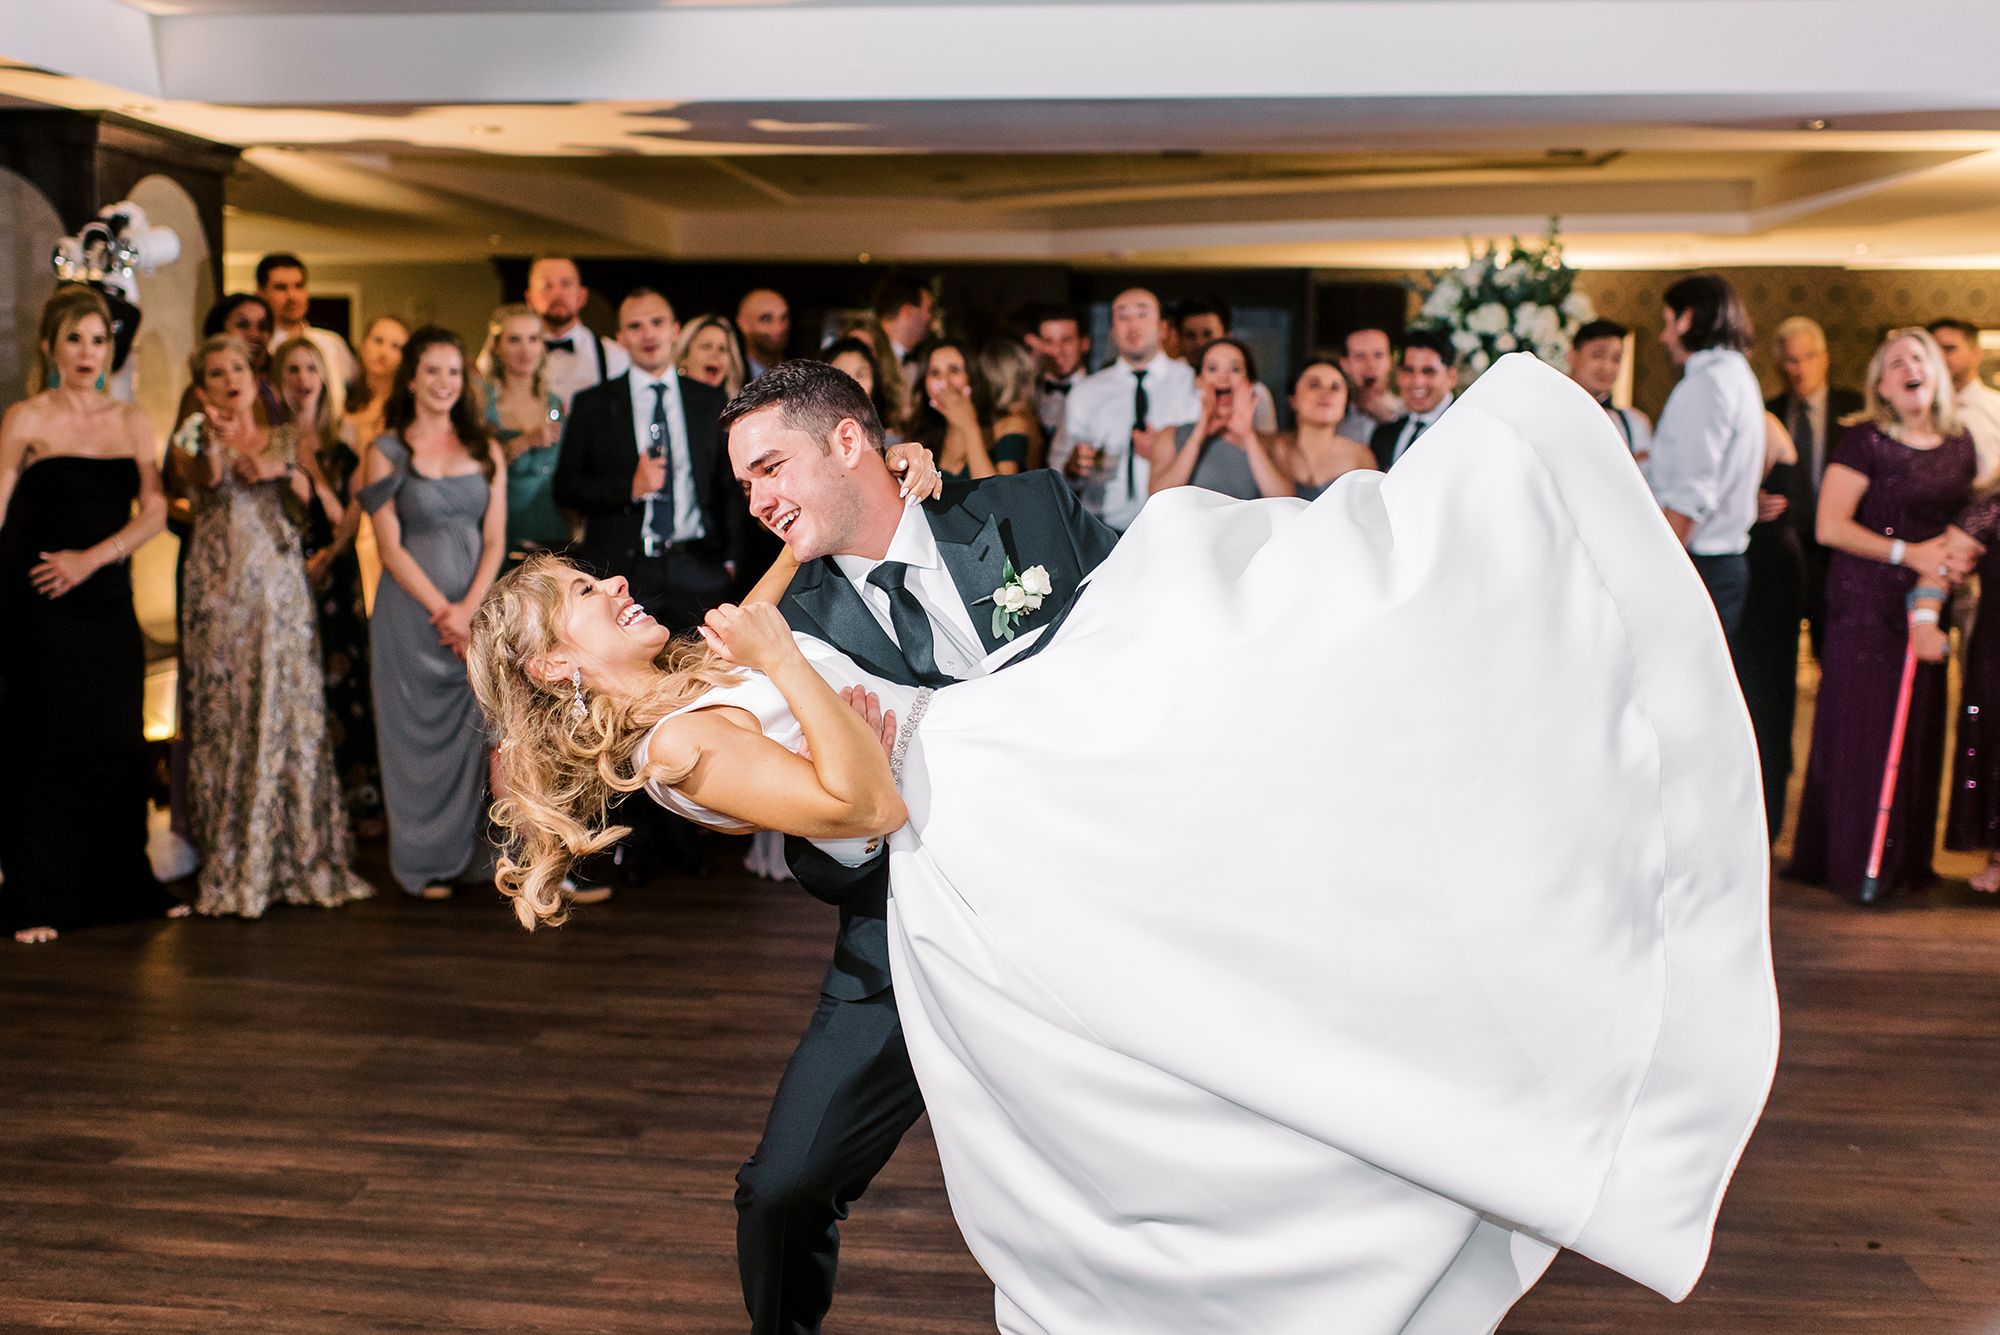 The groom dips the bride on the dance floor while their guests circle them and cheer them on.